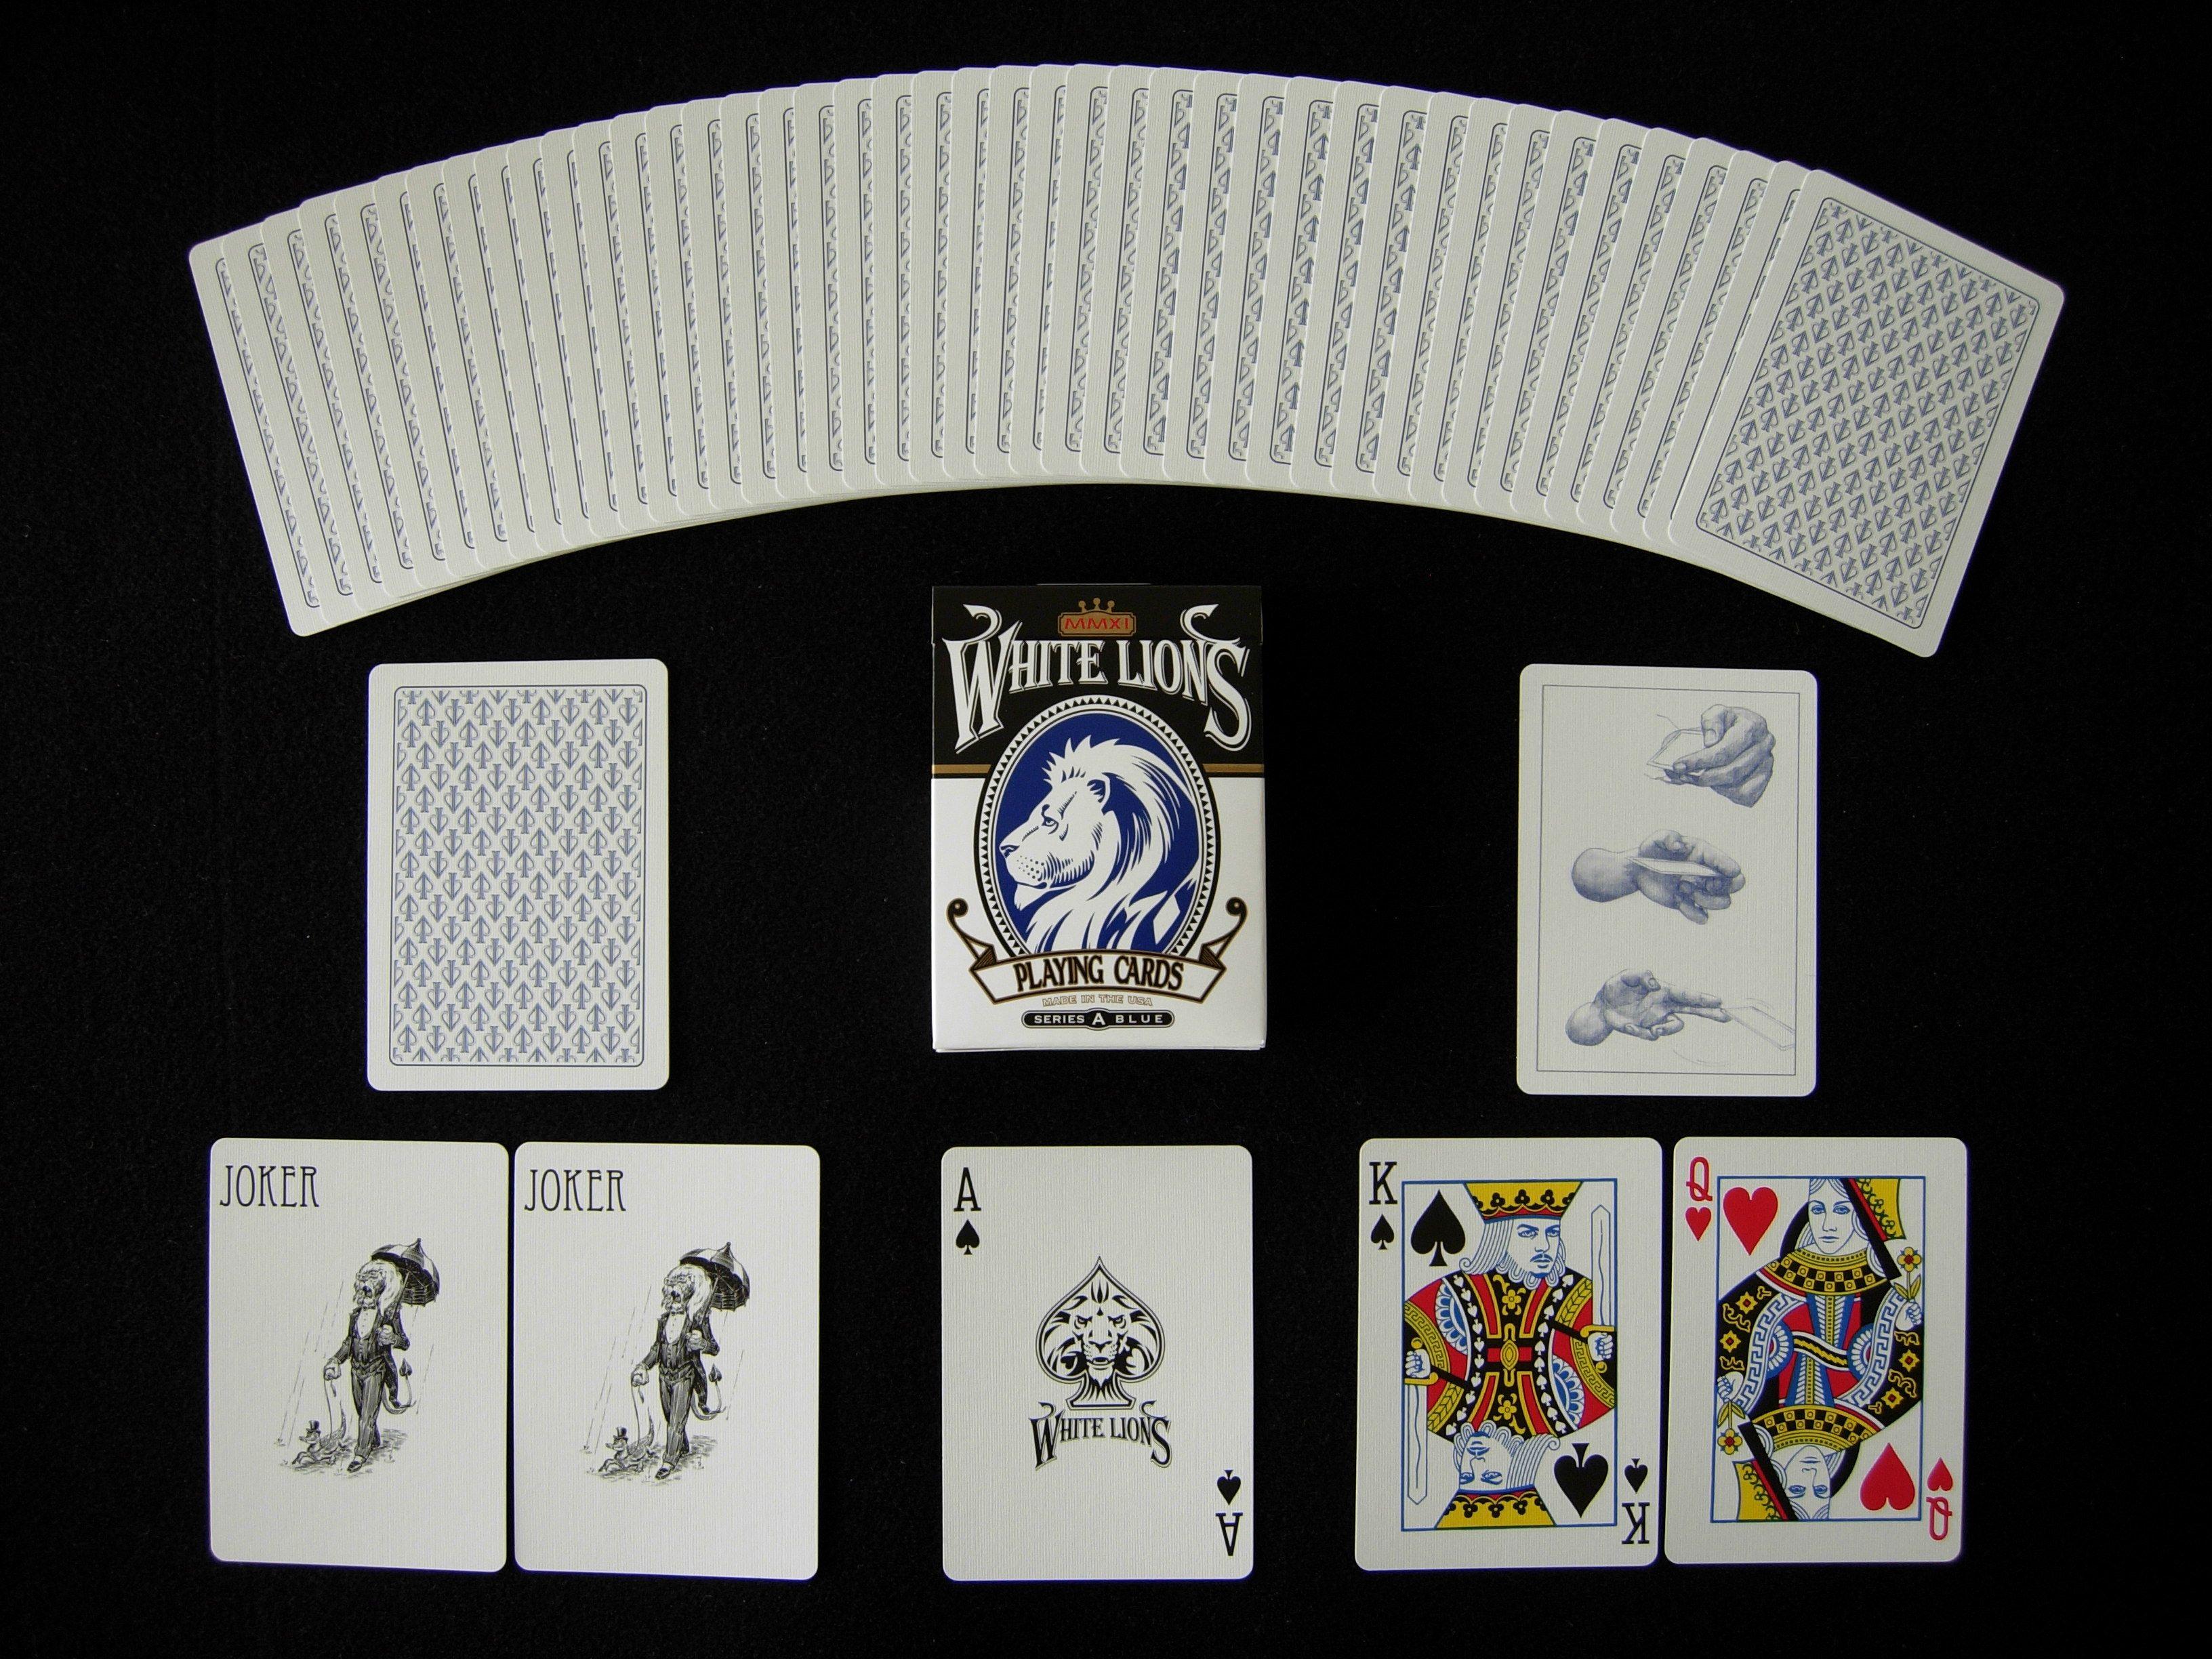 Red and White Lion Logo - Split Spades White Lions - Playing Cards Wiki